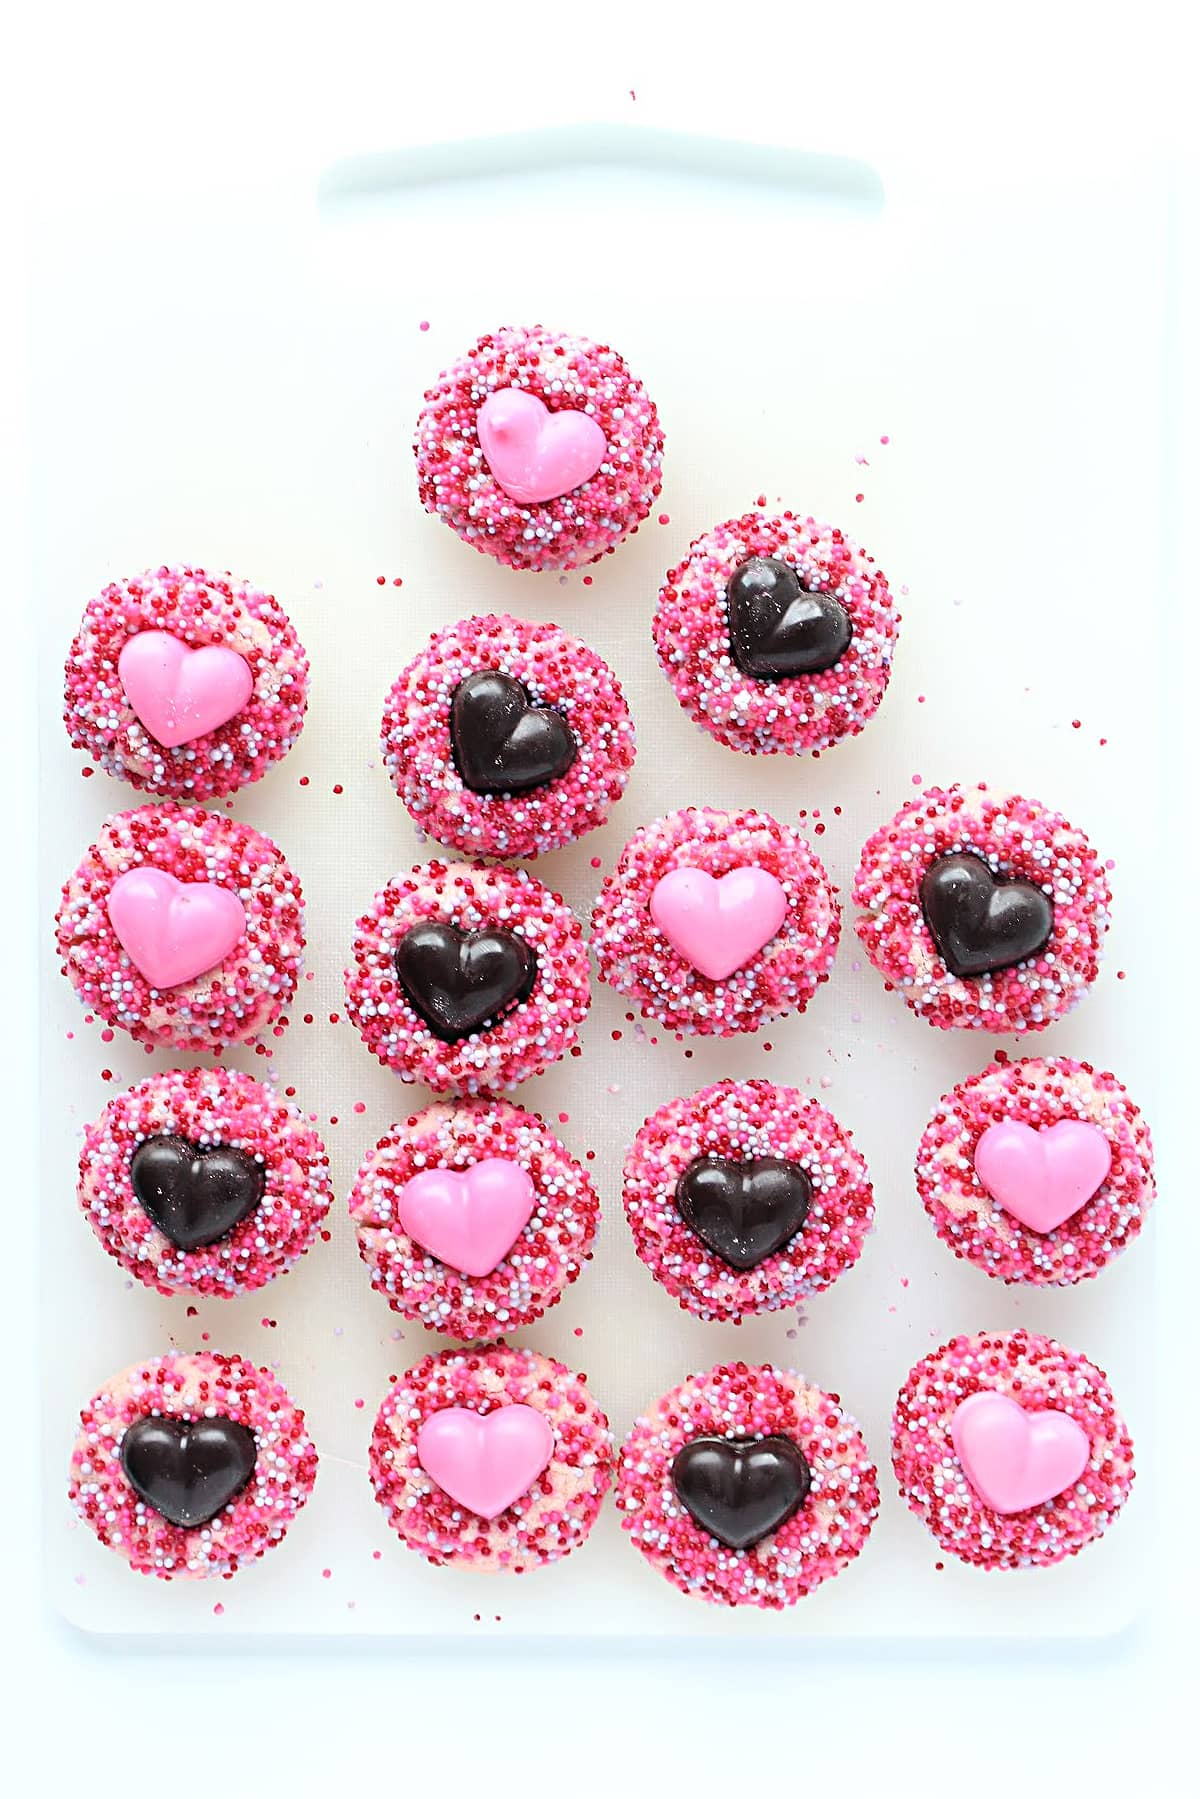 Round shortbread thumbprint cookies coated in nonpareil sprinkles with chocolate heart centers.